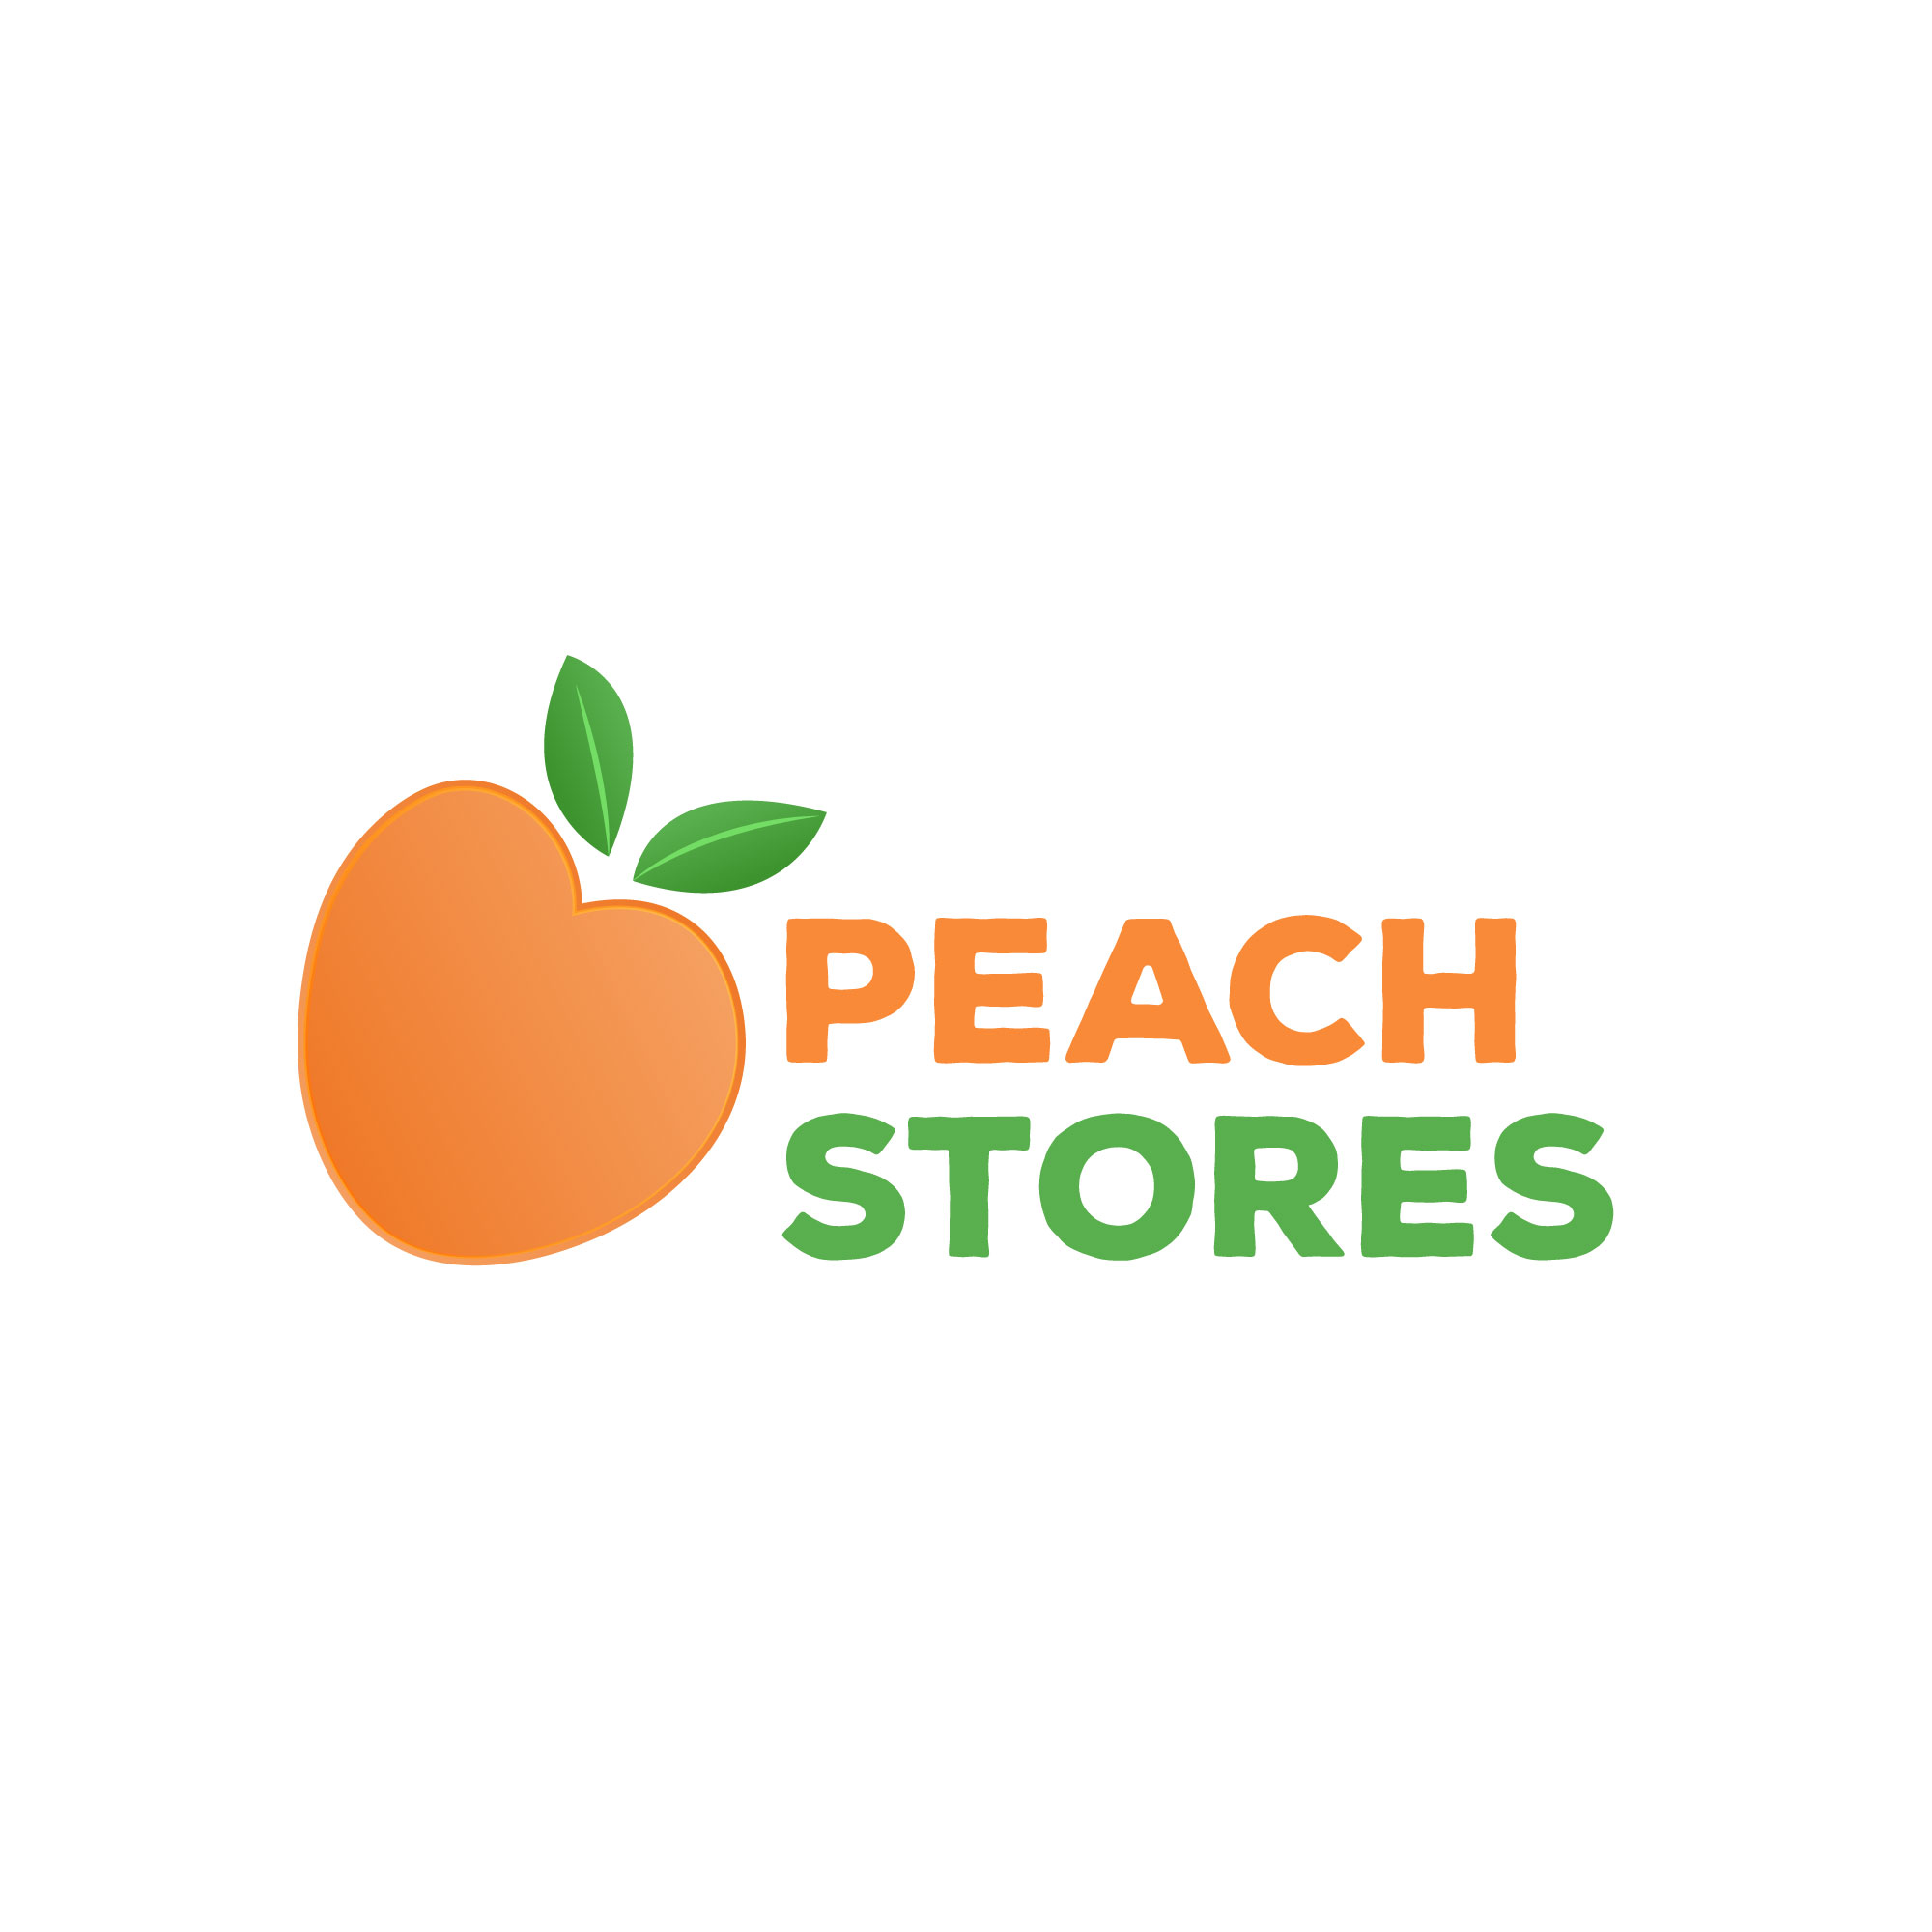 Logo of Peach Stores Computer Maintenance And Repairs In Weymouth, Dorset